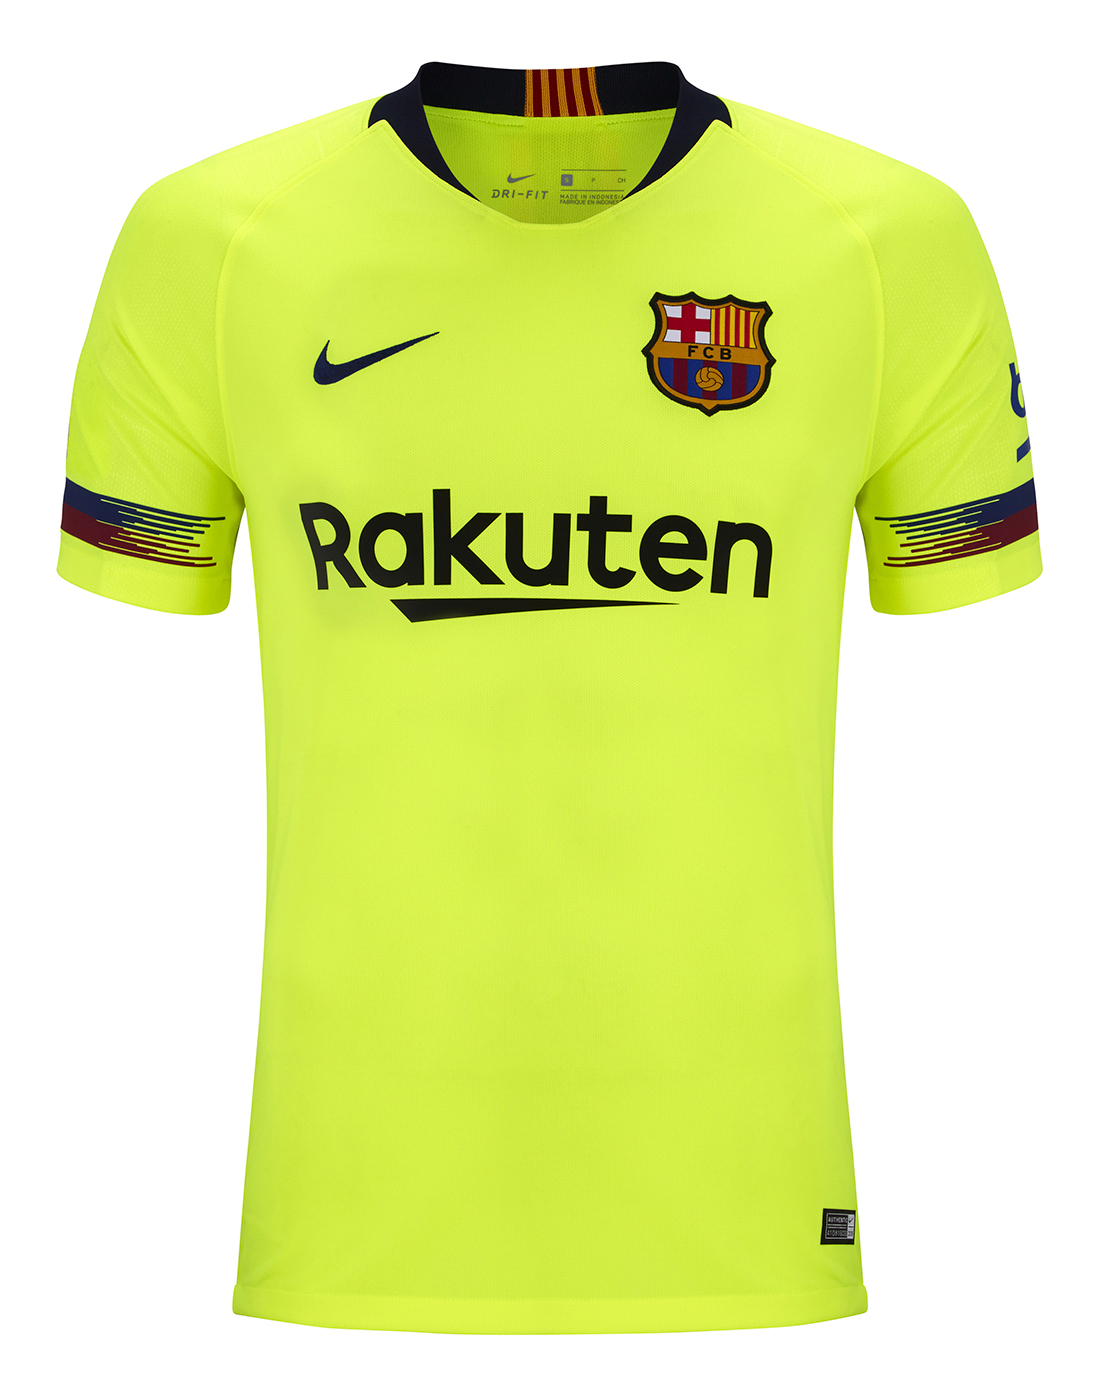 Barca Jersey - Shop for Barcelona Latest Jerseys, Hoodie & Much More